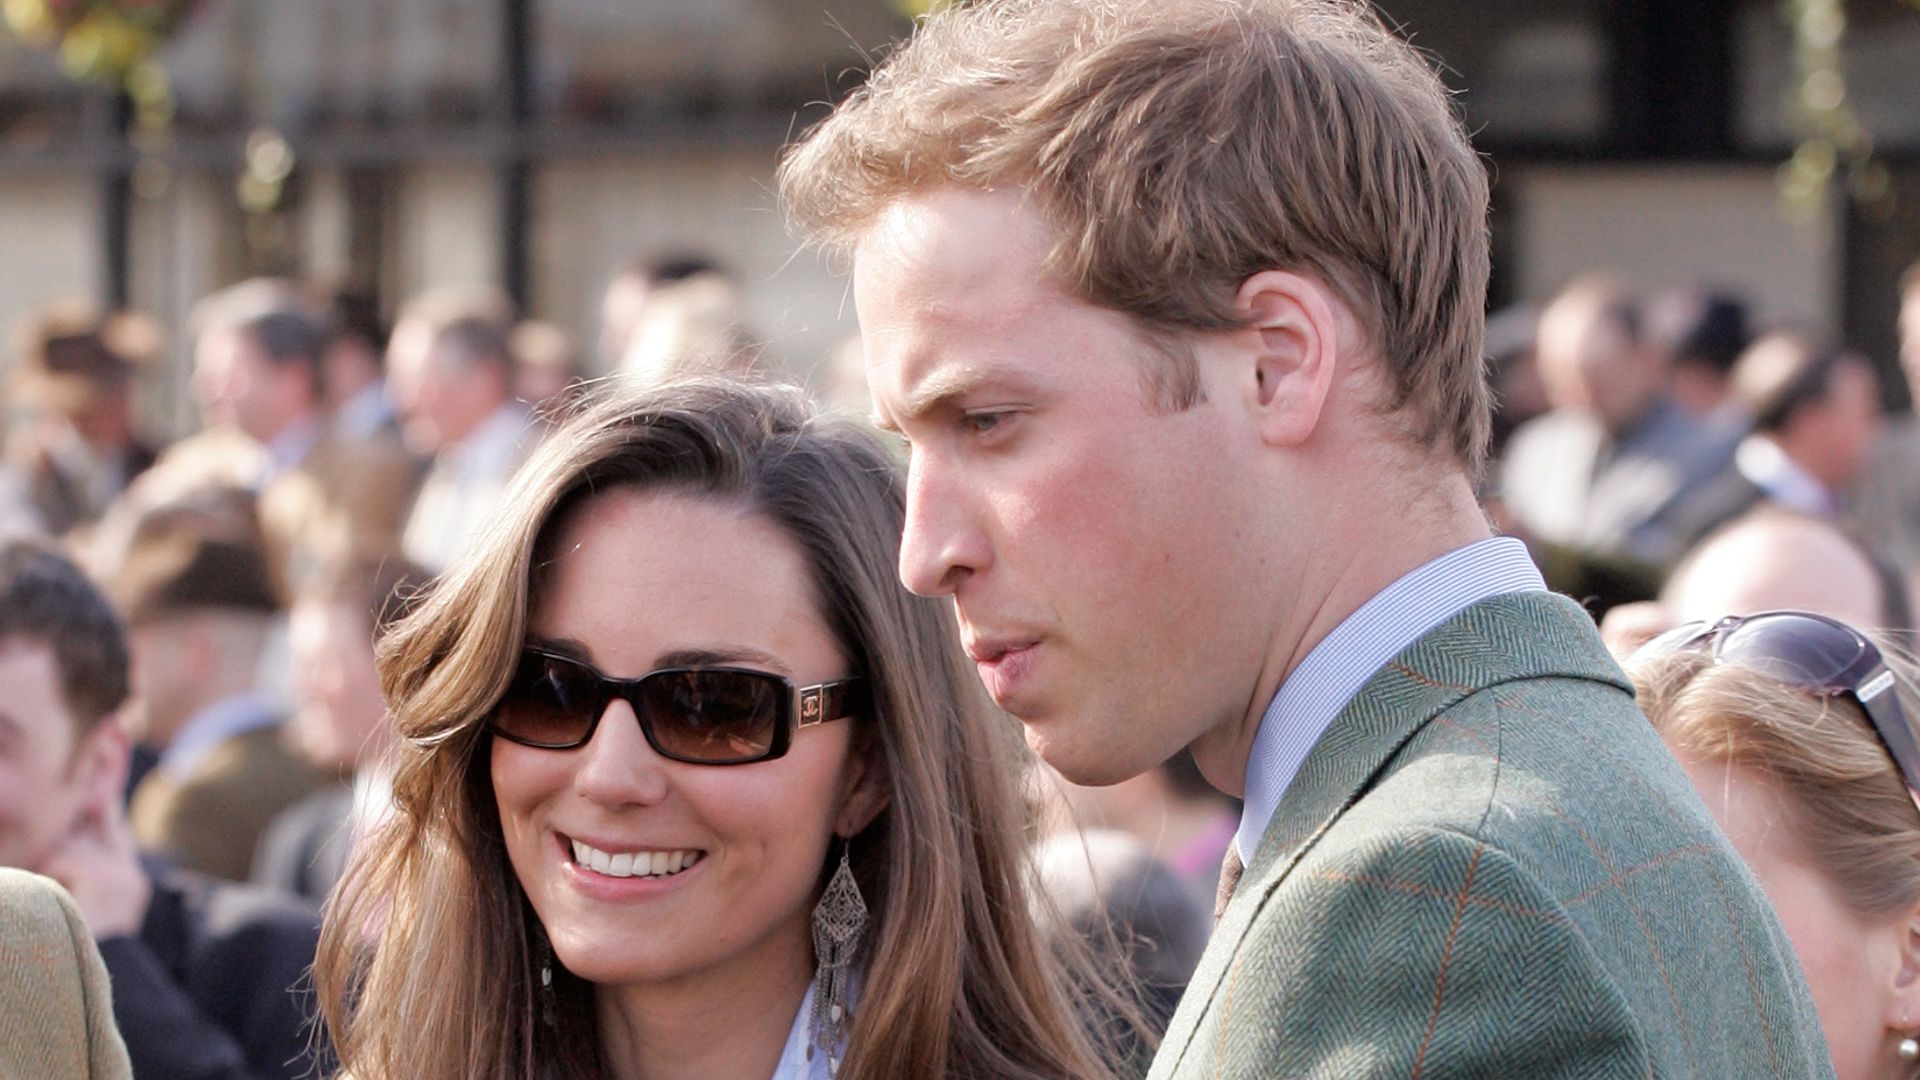 ate Middleton and Prince William attend day 1 of the Cheltenham Horse Racing 